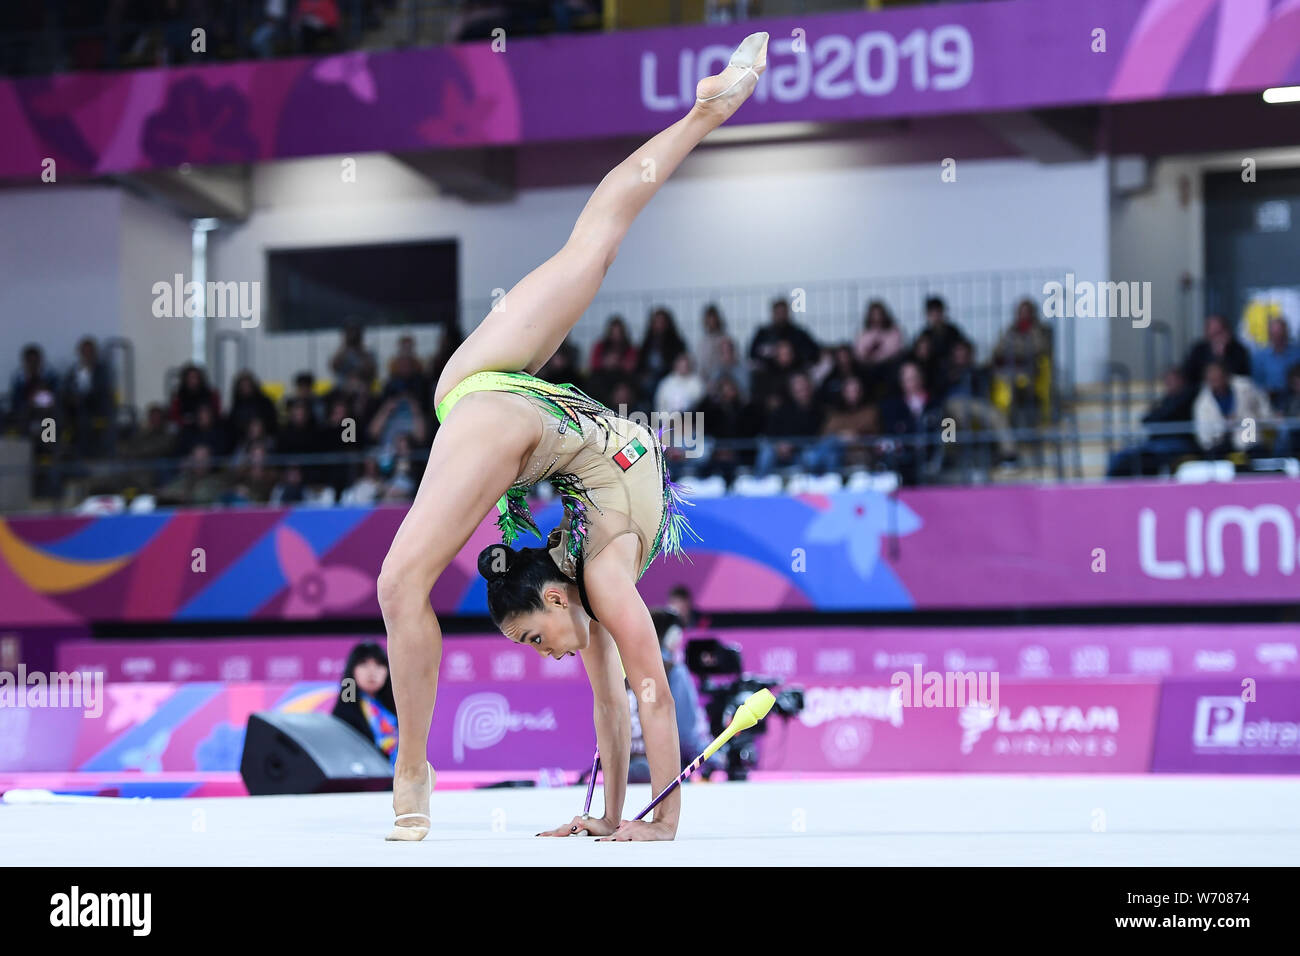 Lima, Peru. 3rd Aug, 2019. RUT CASTILLO from Mexico competes in the individual All-Around with the clubs during the competition held in the Polideportivo Villa El Salvador in Lima, Peru. Credit: Amy Sanderson/ZUMA Wire/Alamy Live News Stock Photo